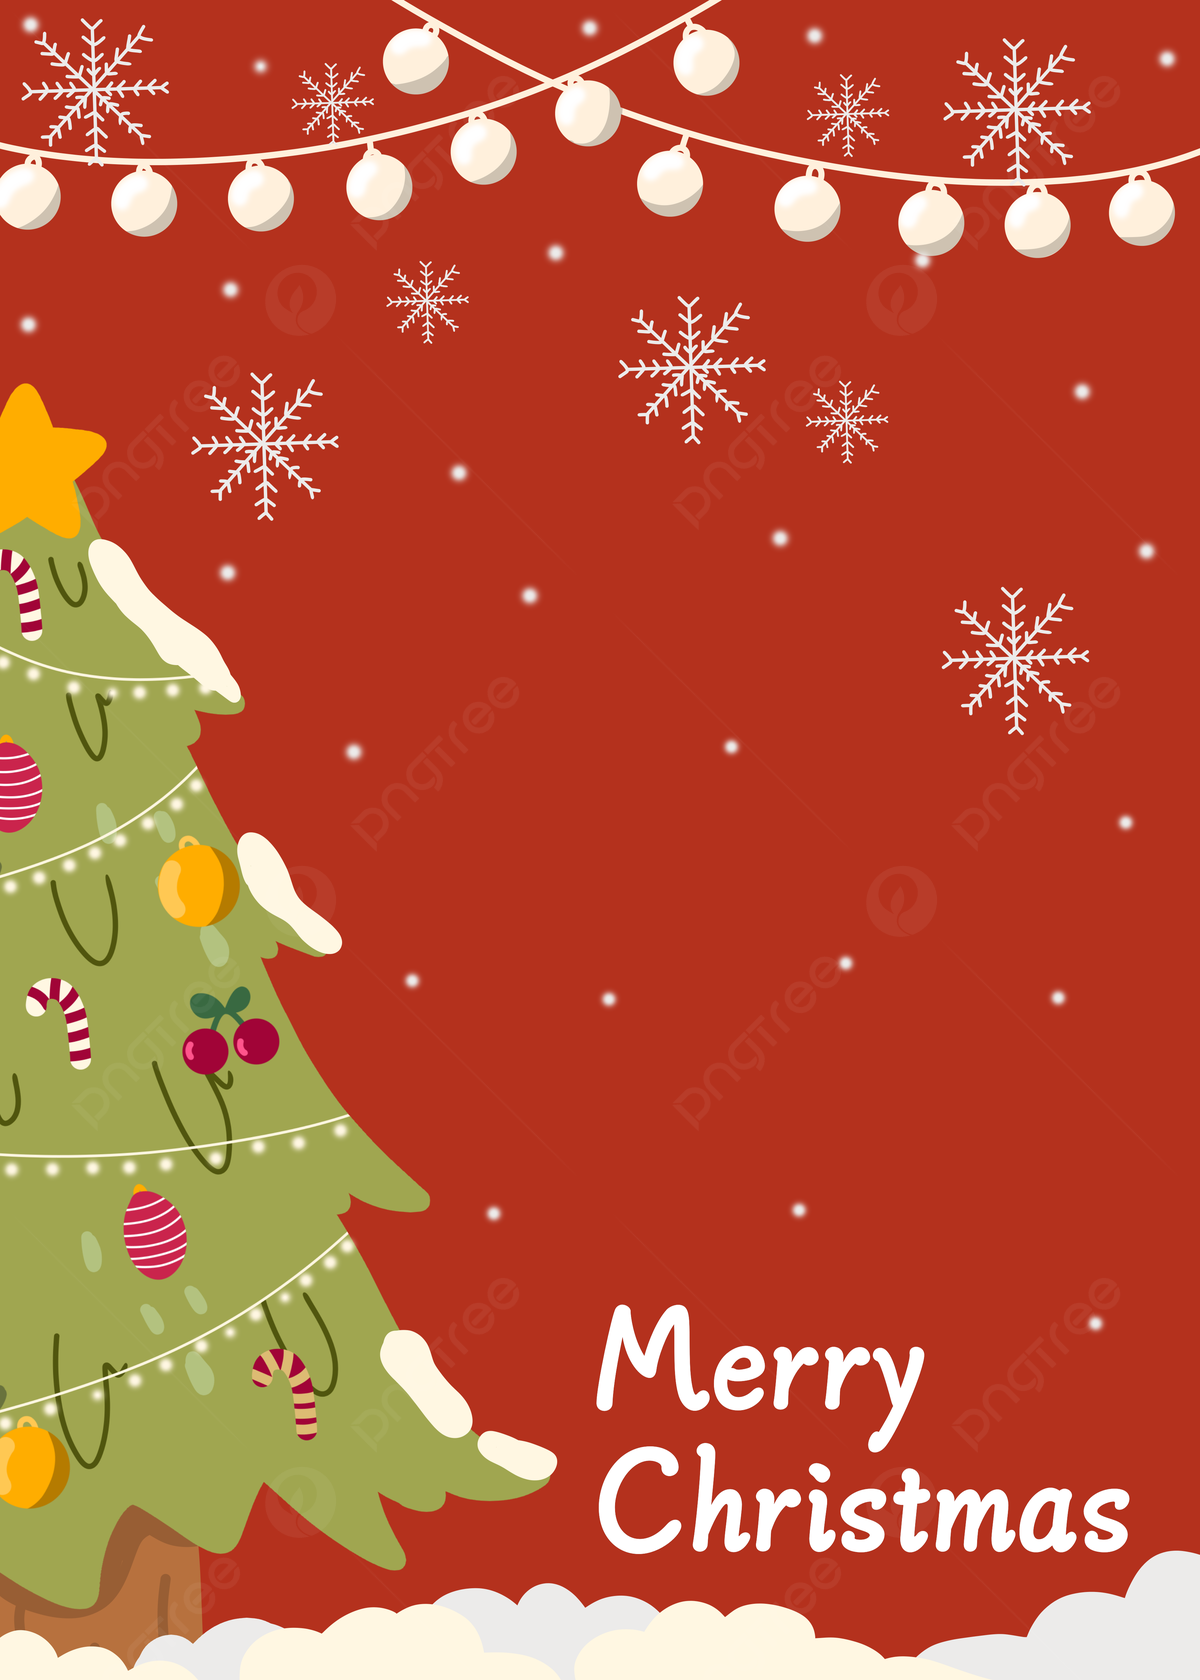 Christmas Background With Tree And Merry Wishes Wallpaper Image For Free Download